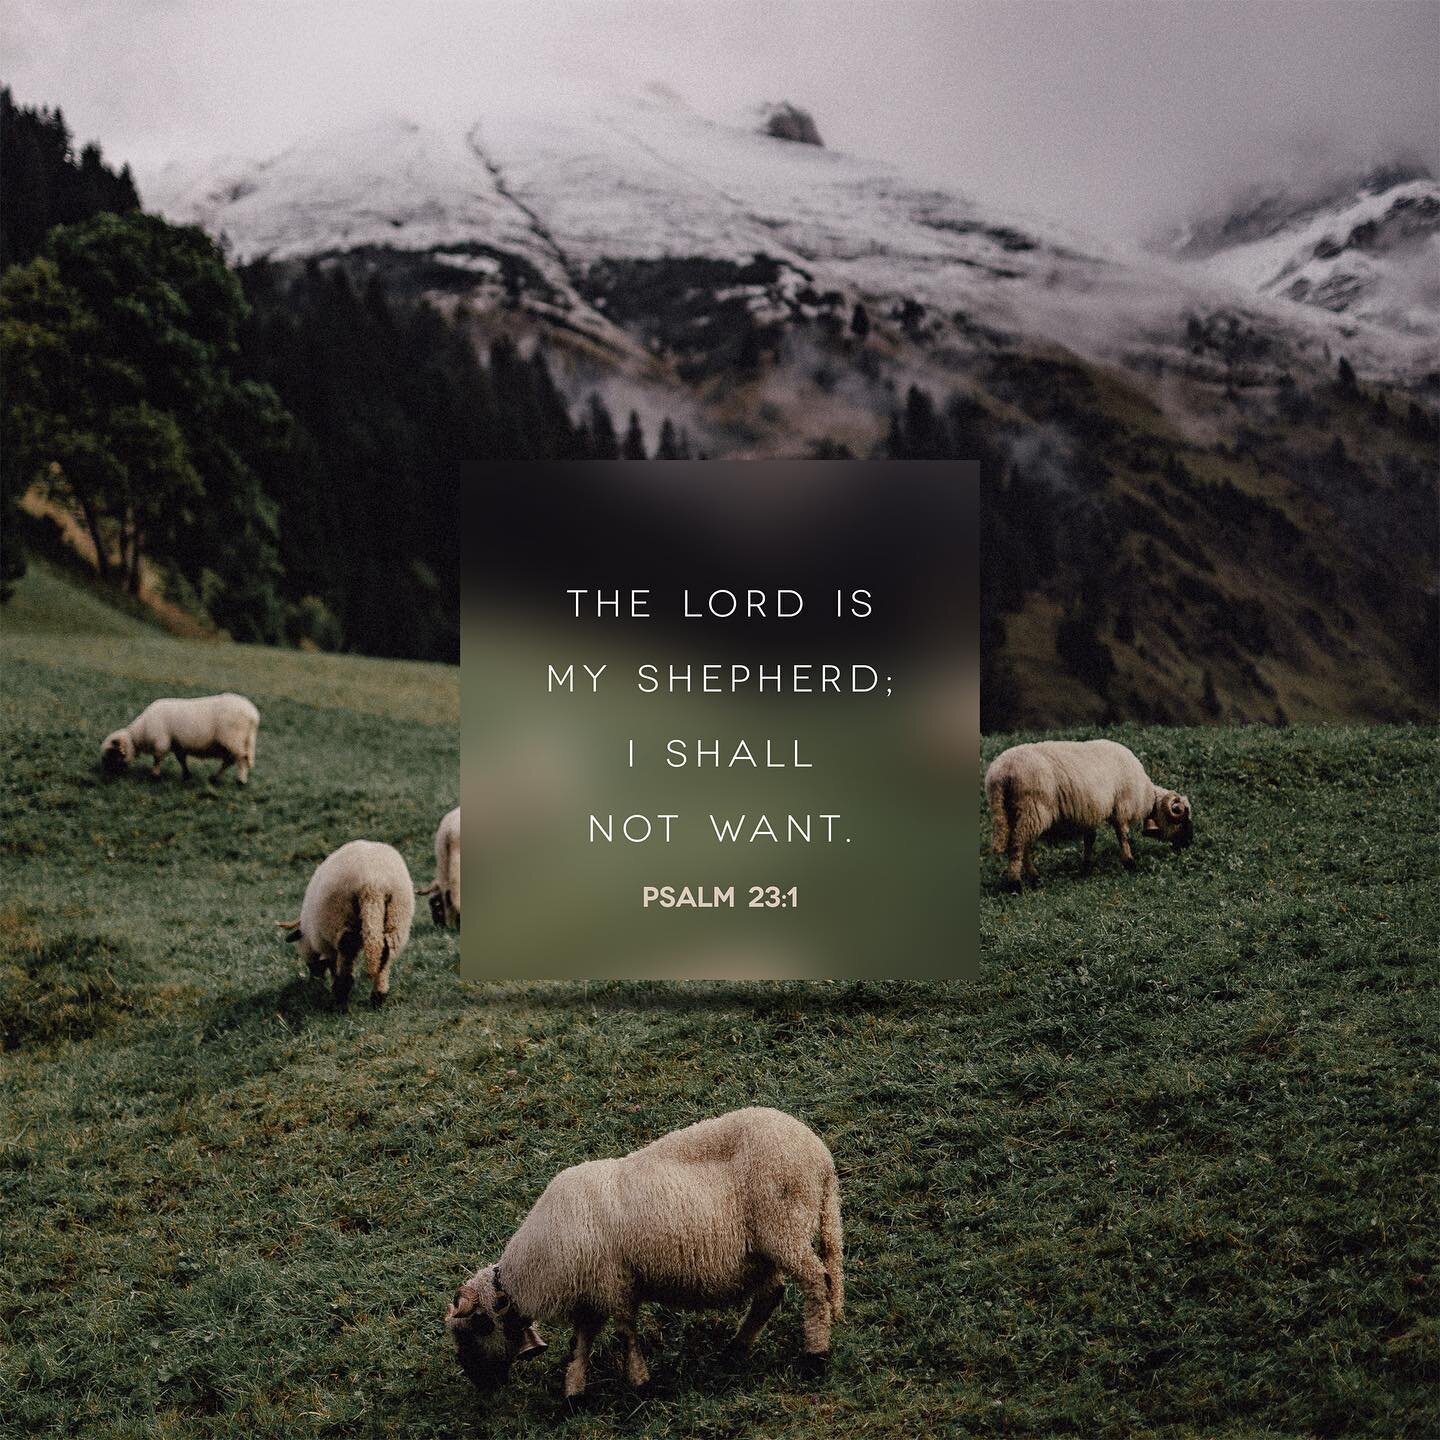 Our Good Shepherd knows what we need as He leads us.